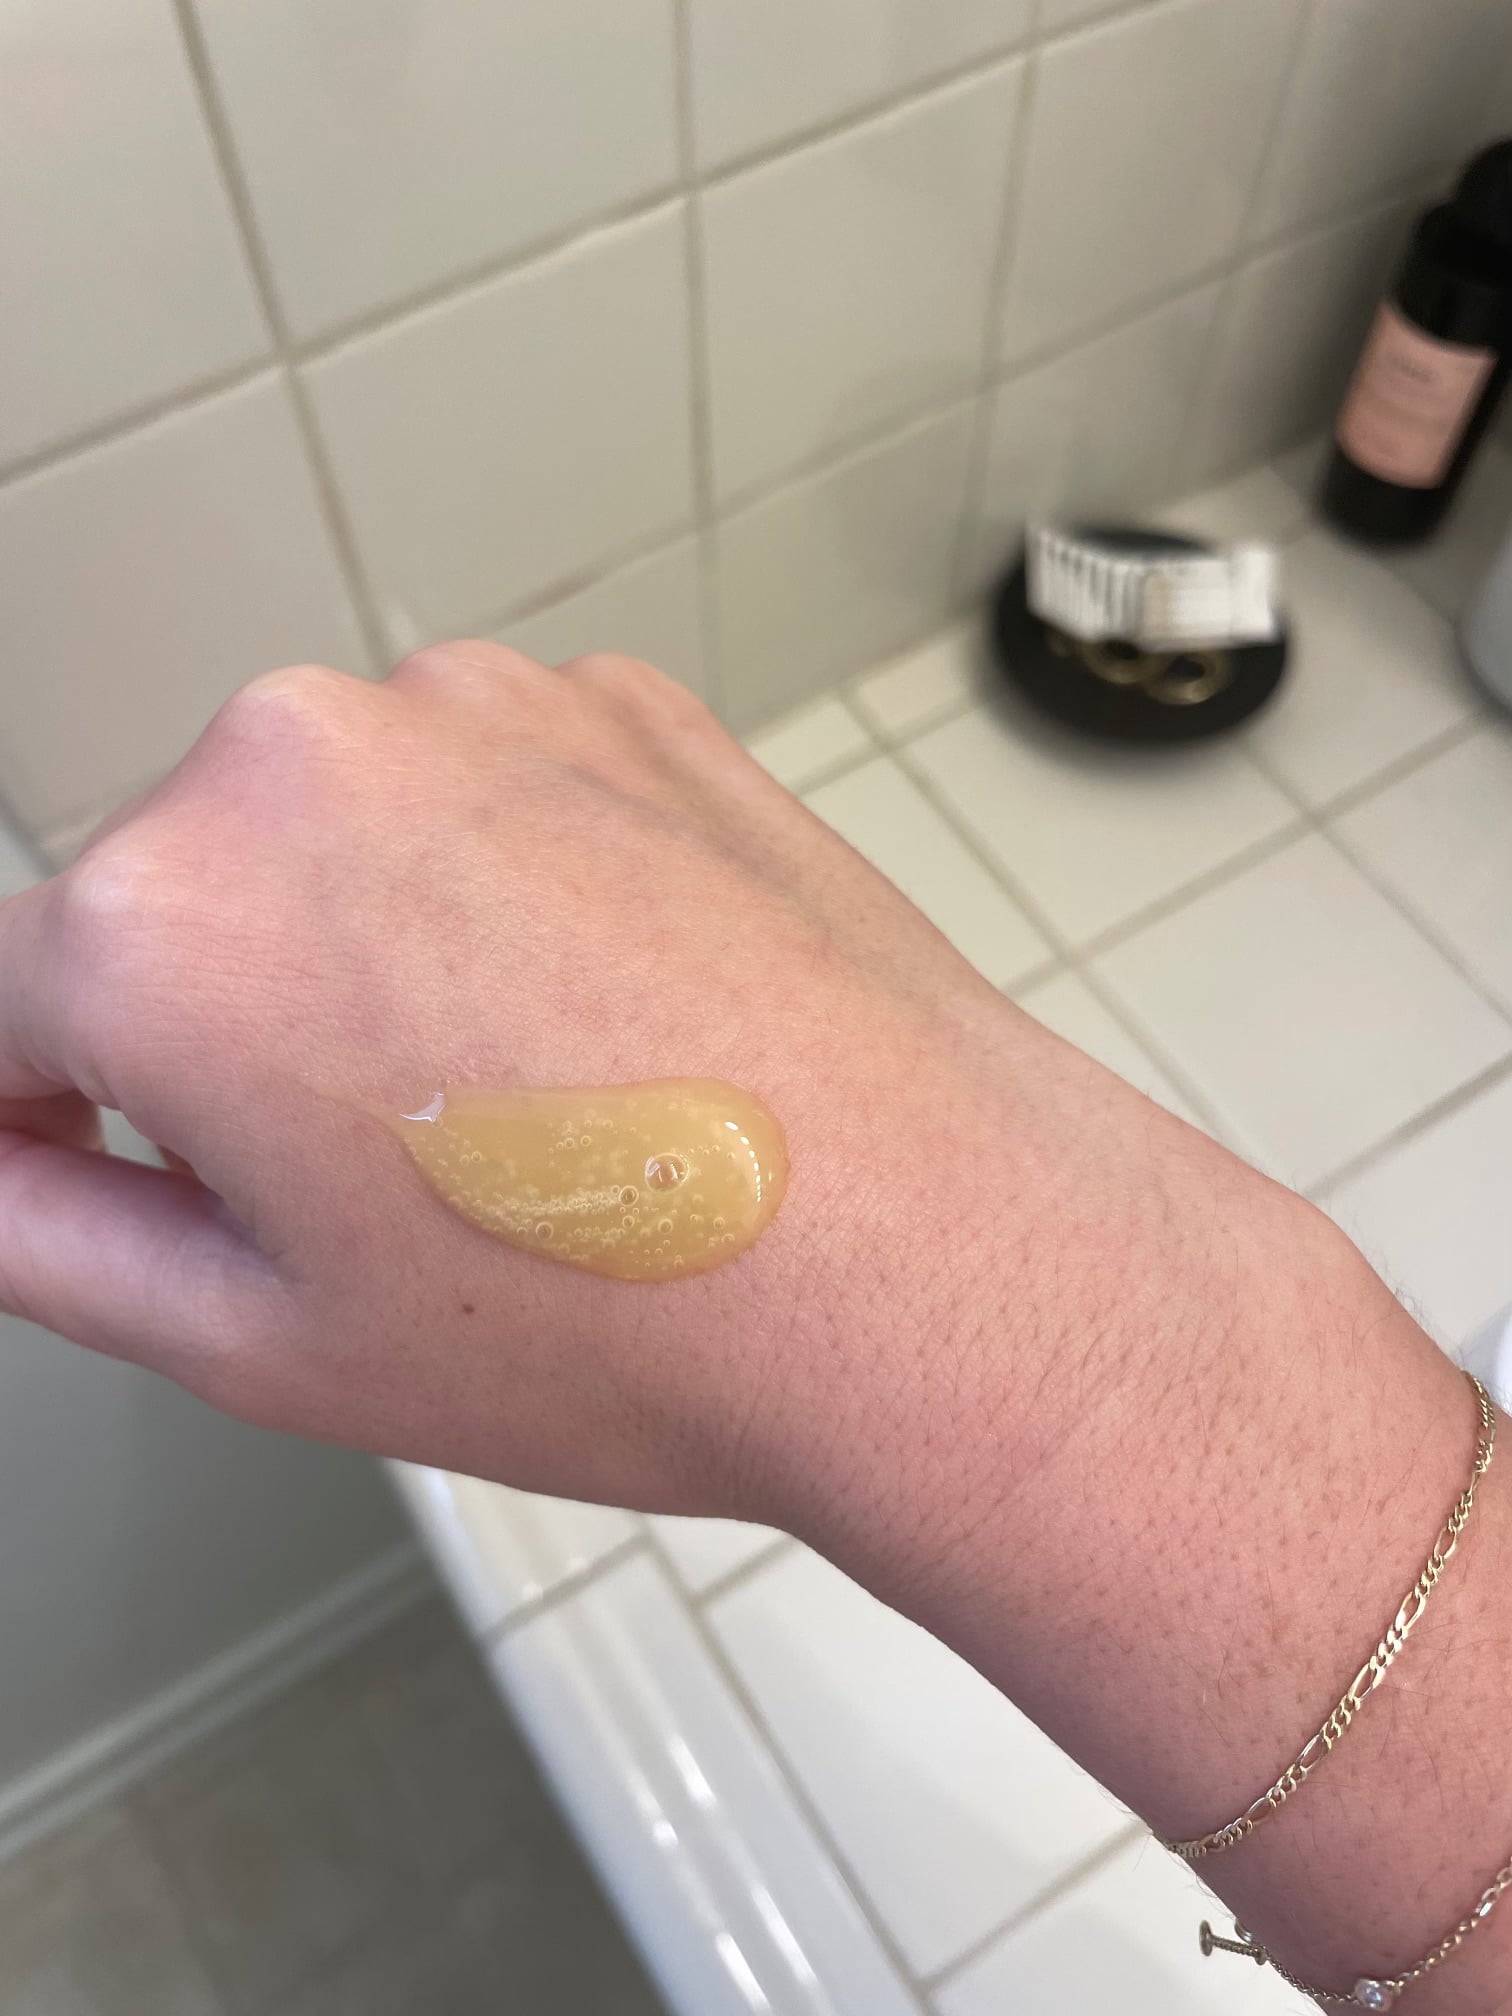 Rhode Pineapple Refresh Cleanser Editor Review